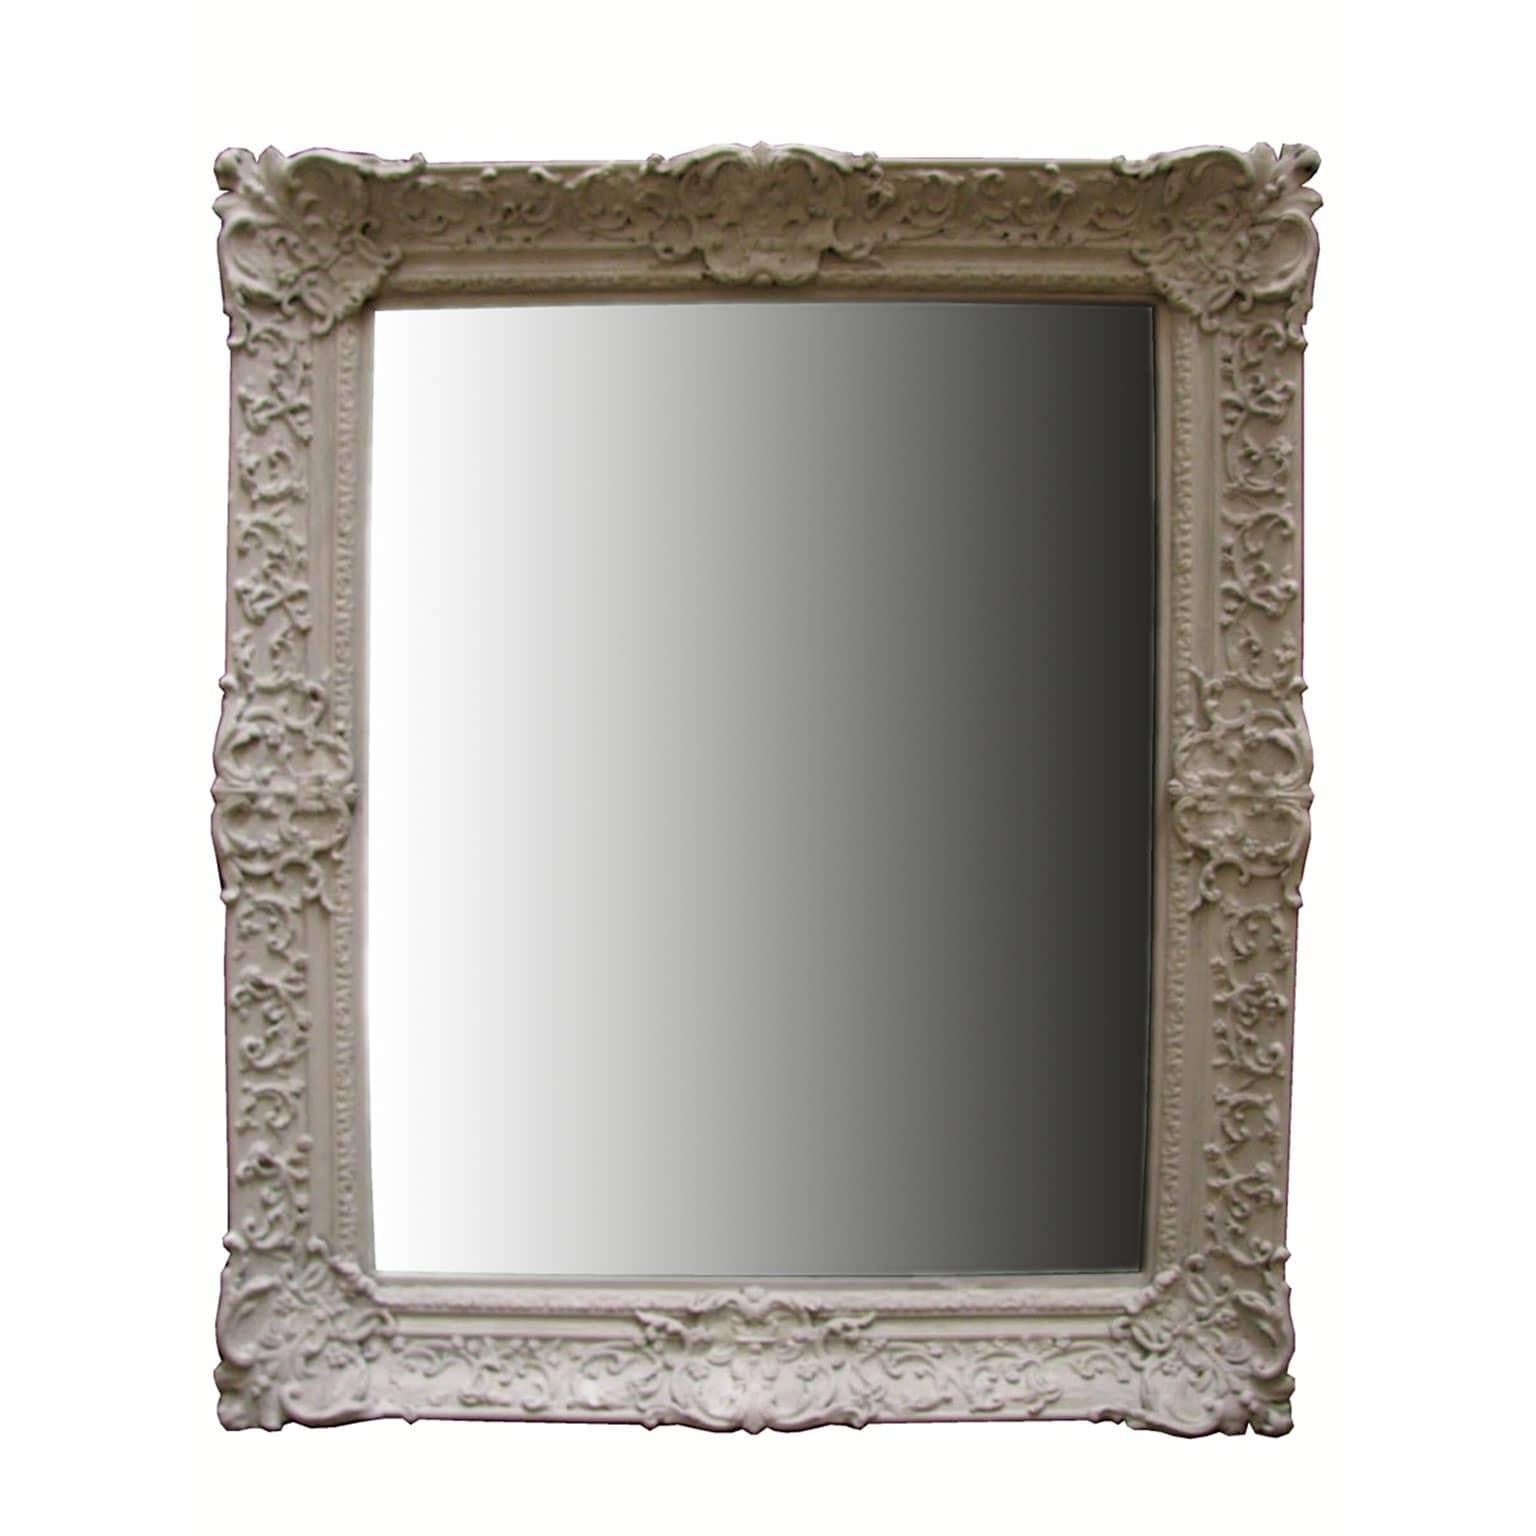 Hand-Painted Large French Rectangular Mirror with Pale Grey Painted Finish Mid-19th Century  For Sale